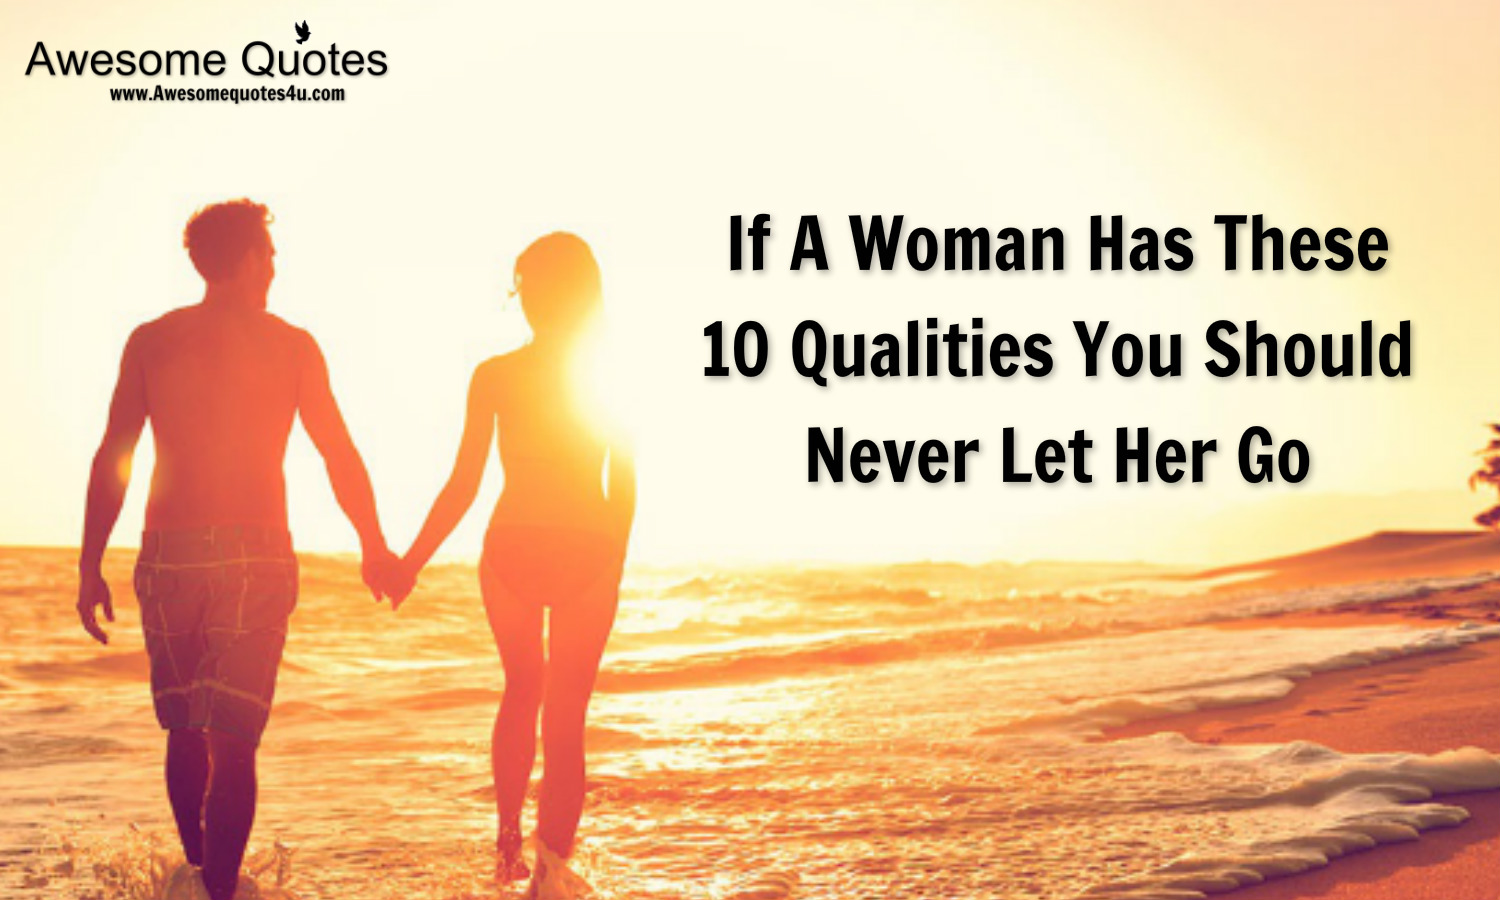 If A Woman Has These 10 Qualities You Should Never